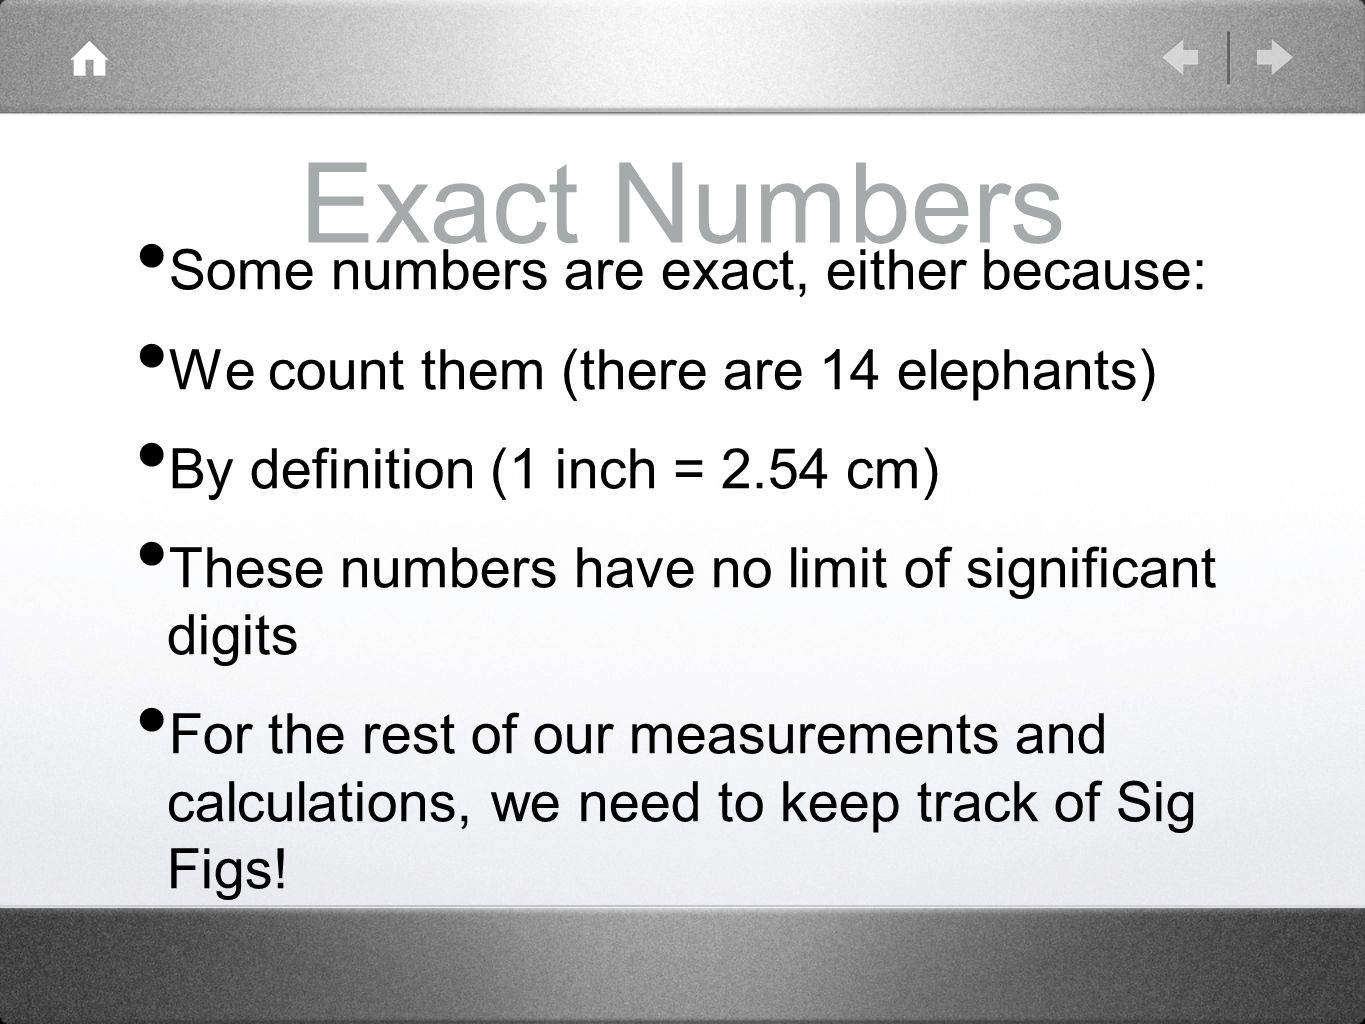 Exact Numbers Some numbers are exact, either because: We count them (there are 14 elephants) By definition (1 inch = 2.54 cm) These numbers have no limit of significant digits For the rest of our measurements and calculations, we need to keep track of Sig Figs!